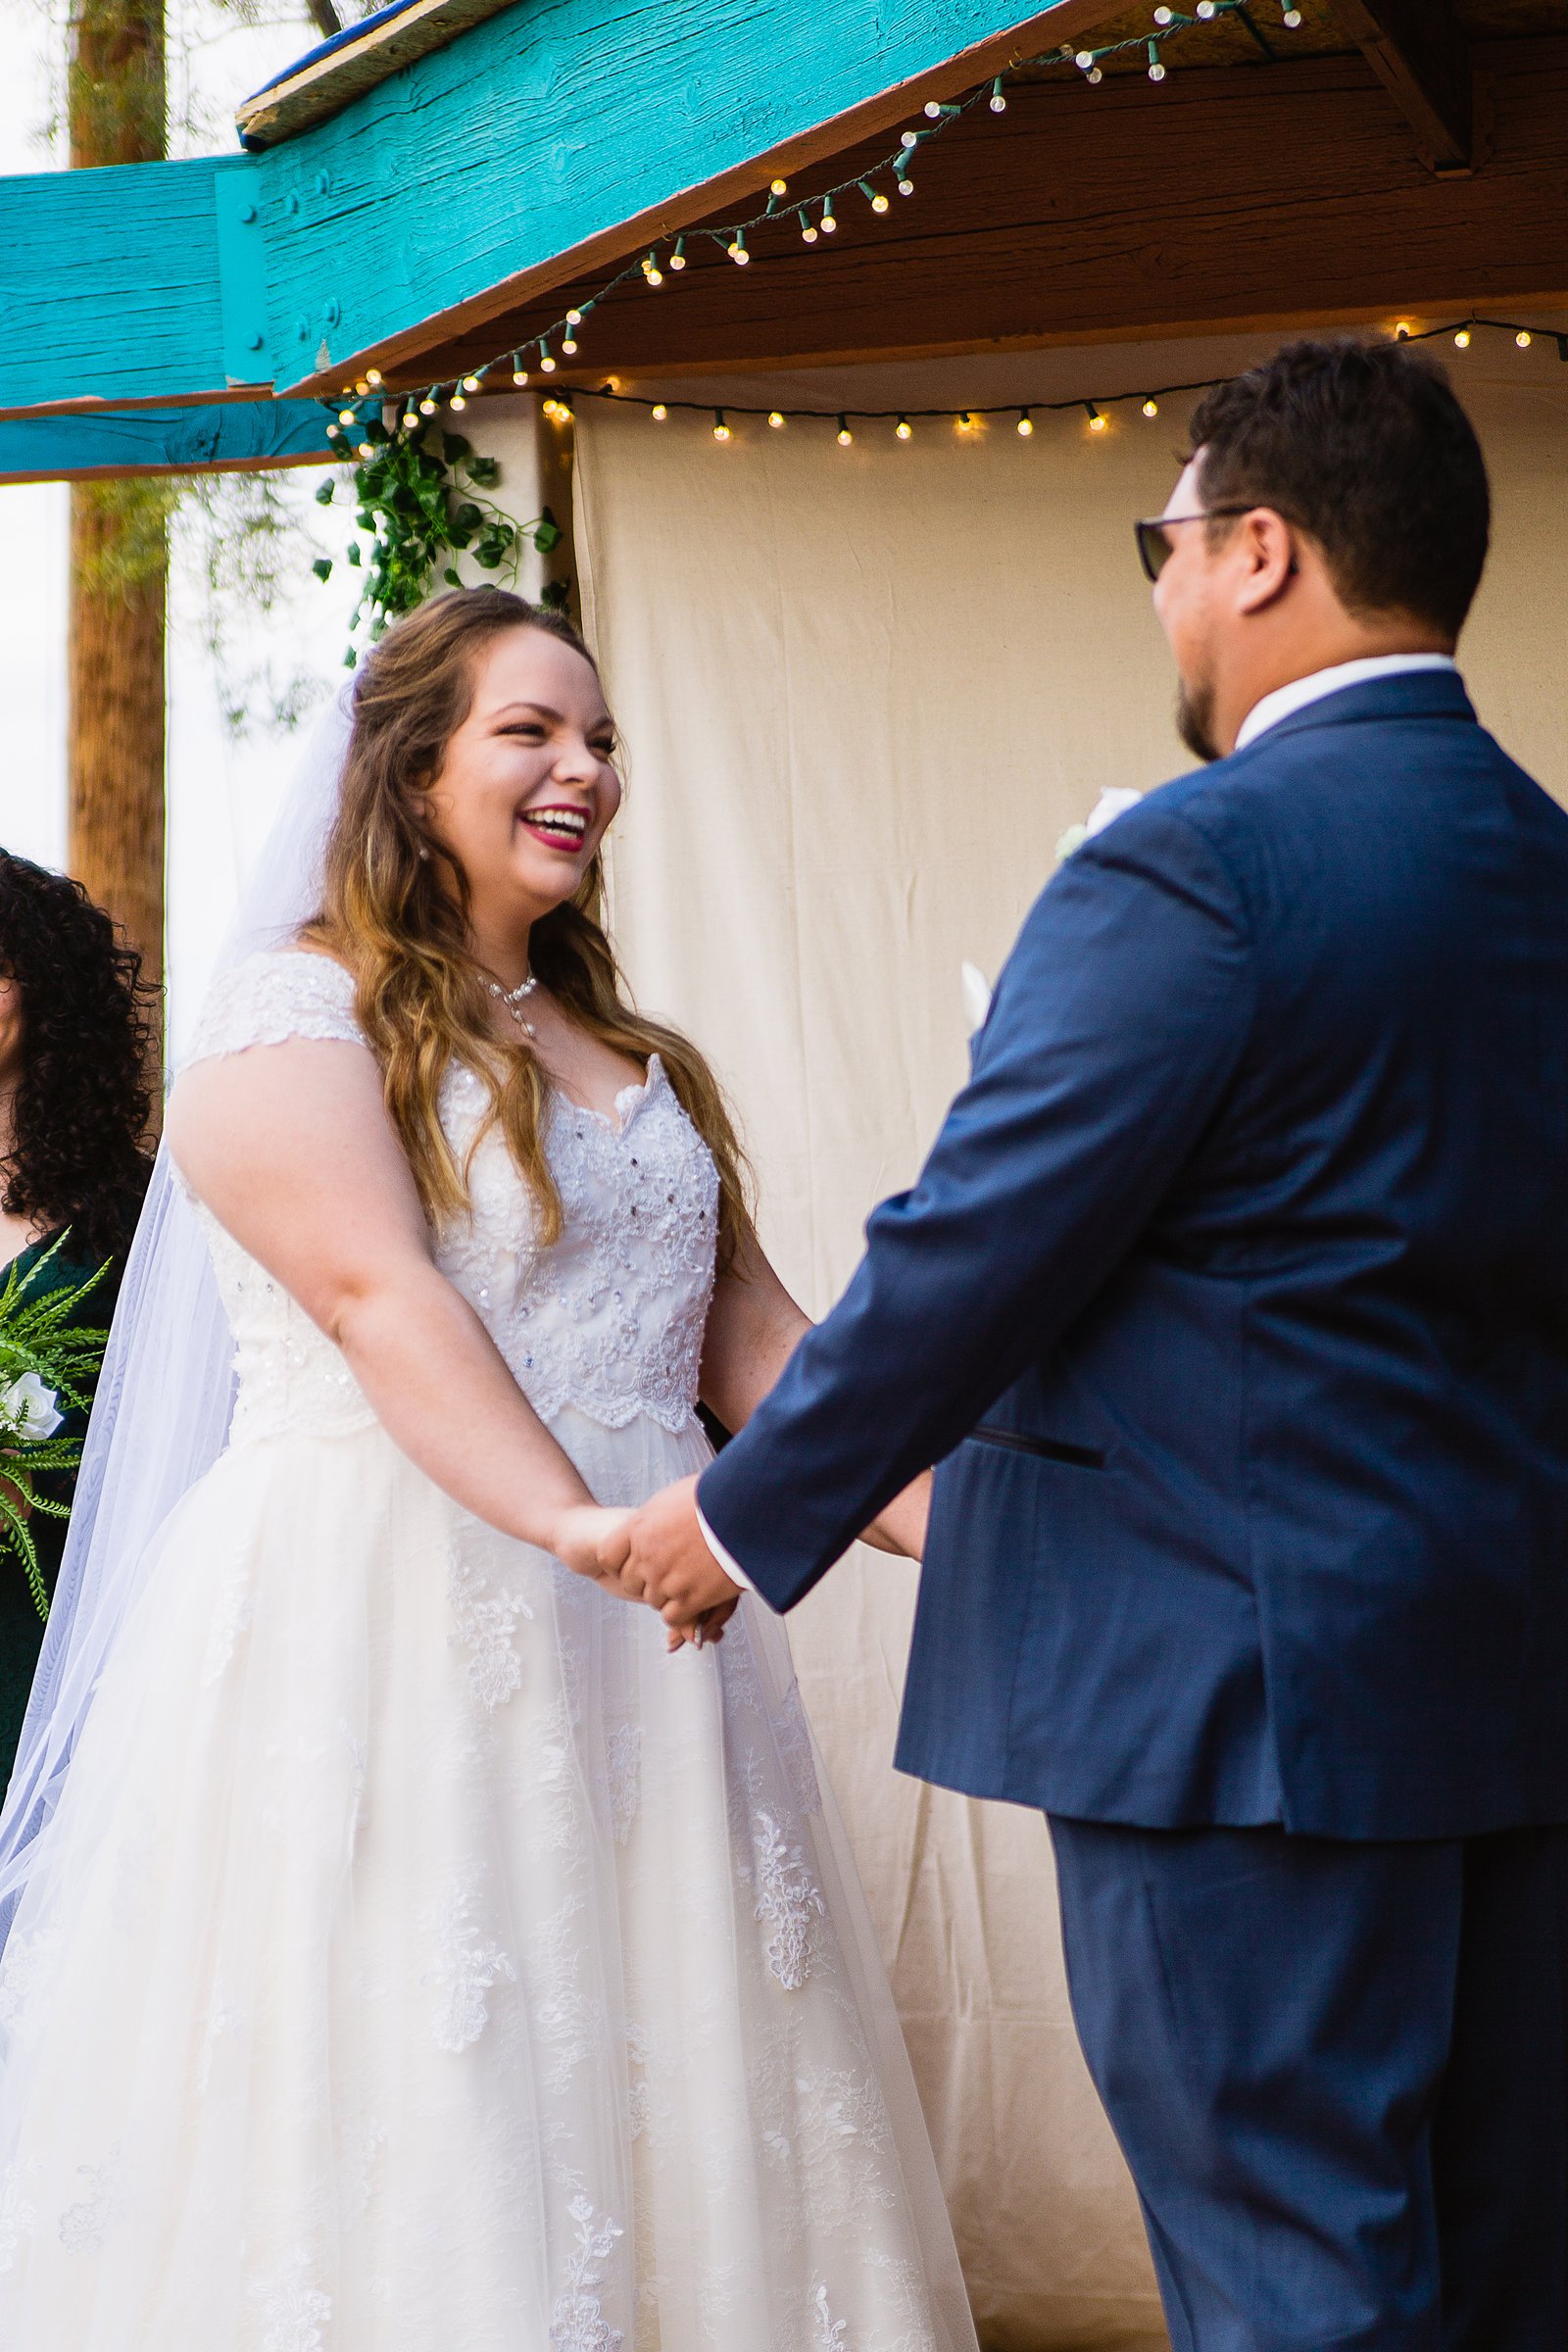 Bride laughing with her groom during their wedding ceremony at Backyard by Casa Grande wedding photographer PMA Photography.